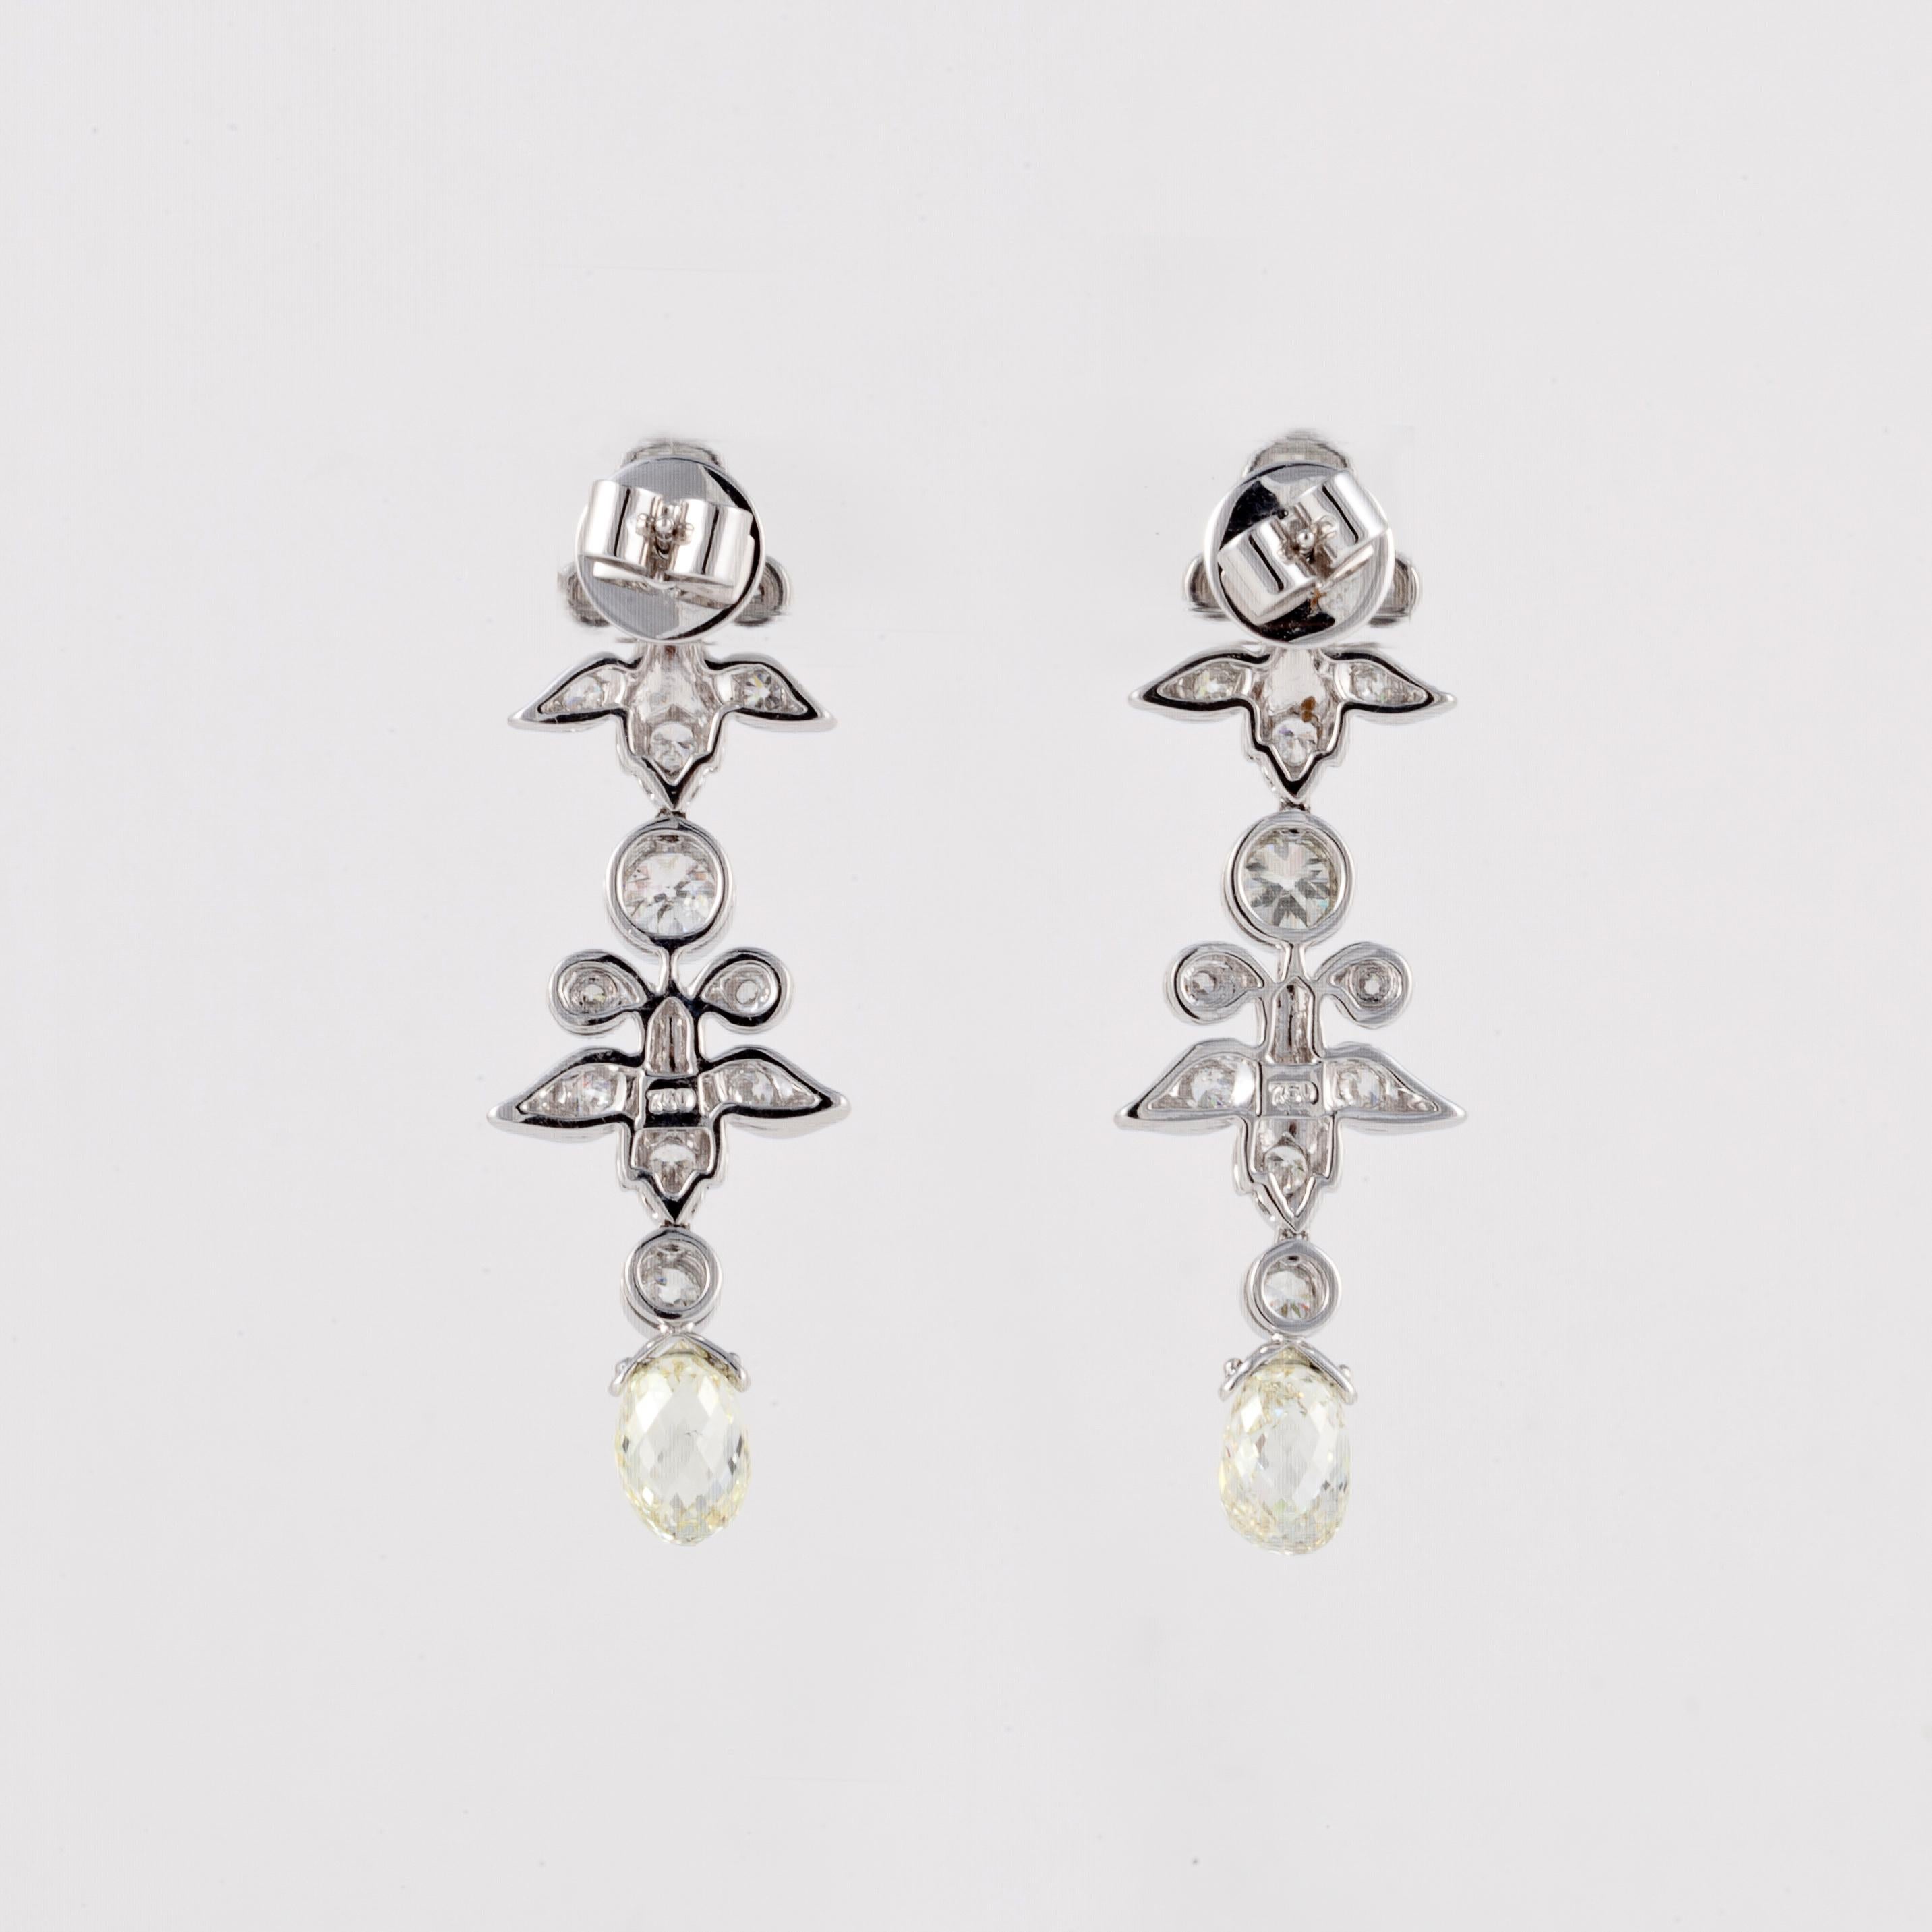 A pair of diamond drop earrings composed of 18K white gold and diamonds.  There are 26 round diamonds totaling 3.50 carats; G-H color and VS1-SI2 clarity.  There are two briolette diamonds that total 4.50 carats; I-J color and VS1-SI1 clarity.  They